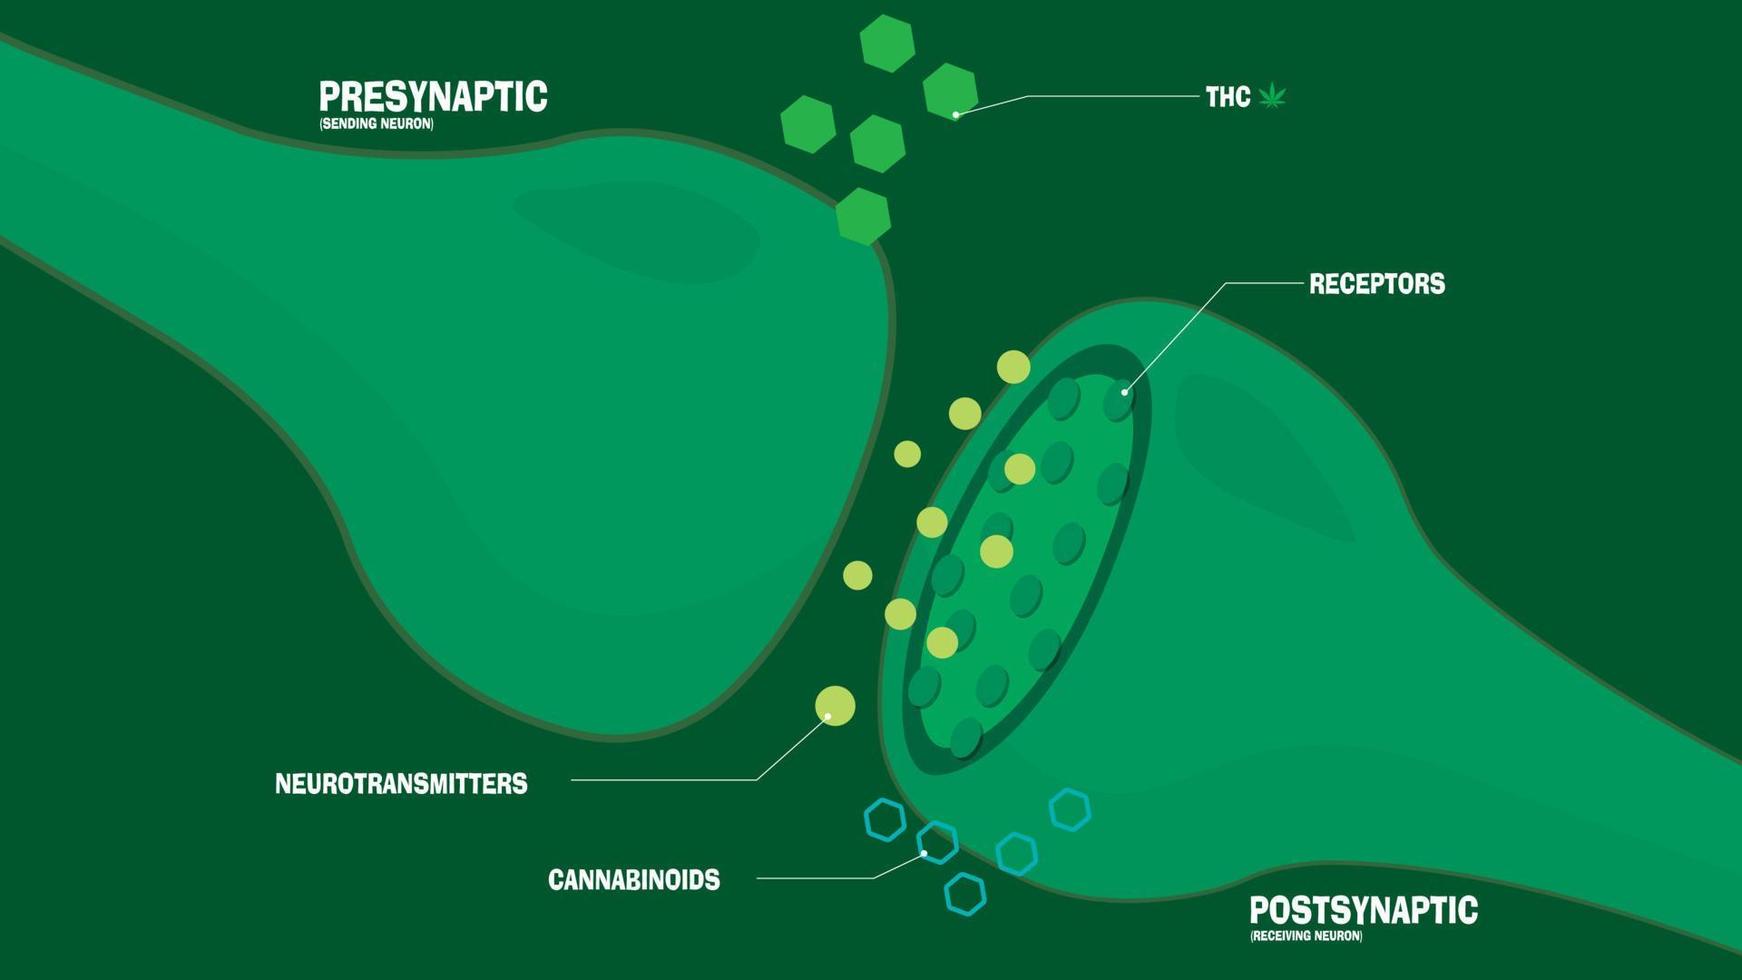 The effect of CBD on the endocannabinoid system and brain using visual aids vector illustration